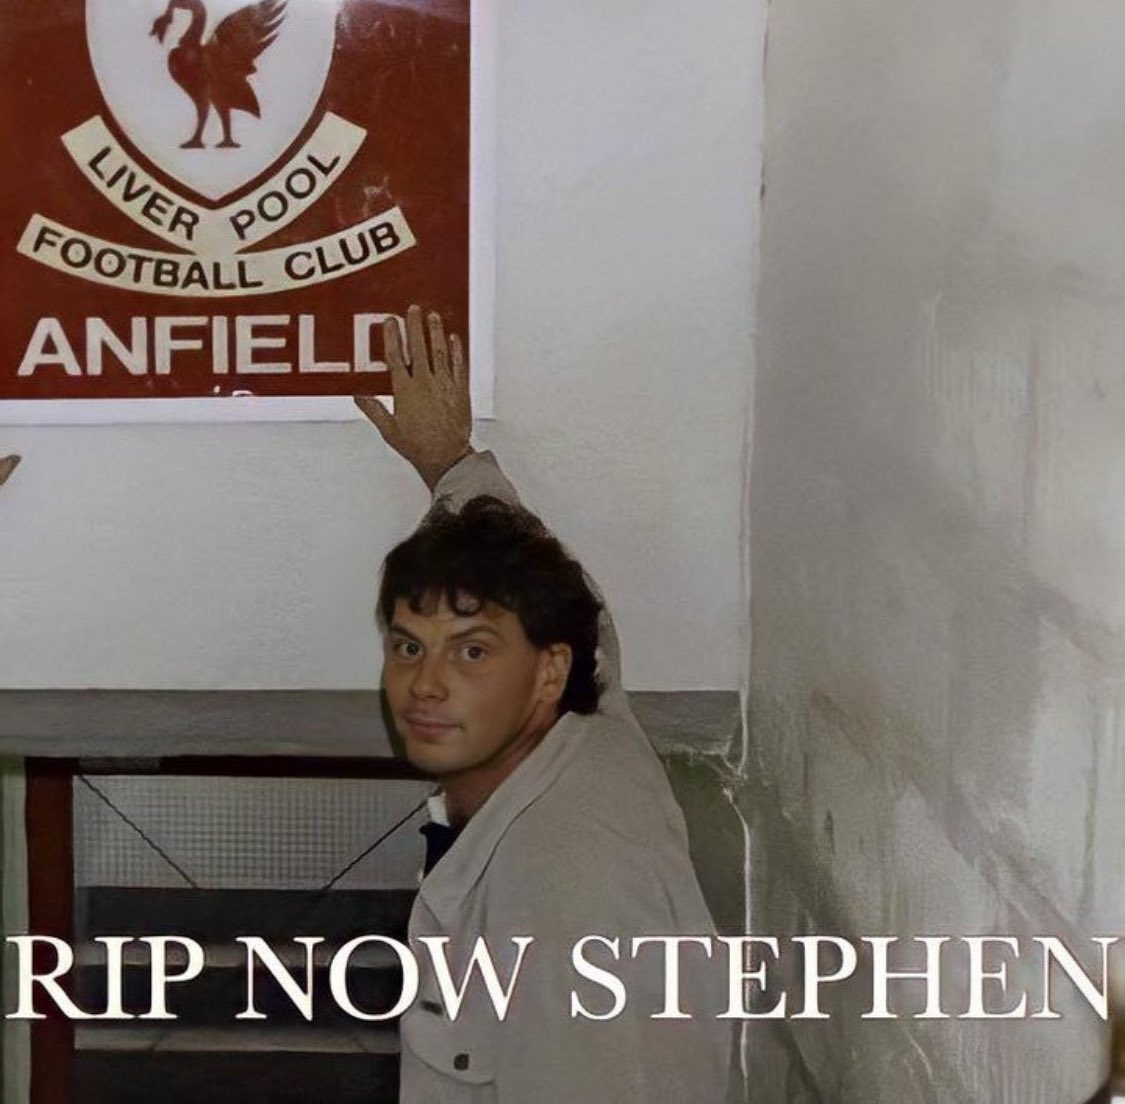 This is the Hillsborough Victim that rarely gets a mention. Stephen Whittle sold his ticket for that match to his friend who later died in the Hillsborough Disaster. Stephen committed suicide a few years ago by jumping infront of a train. Just before he did that, he left £61,000